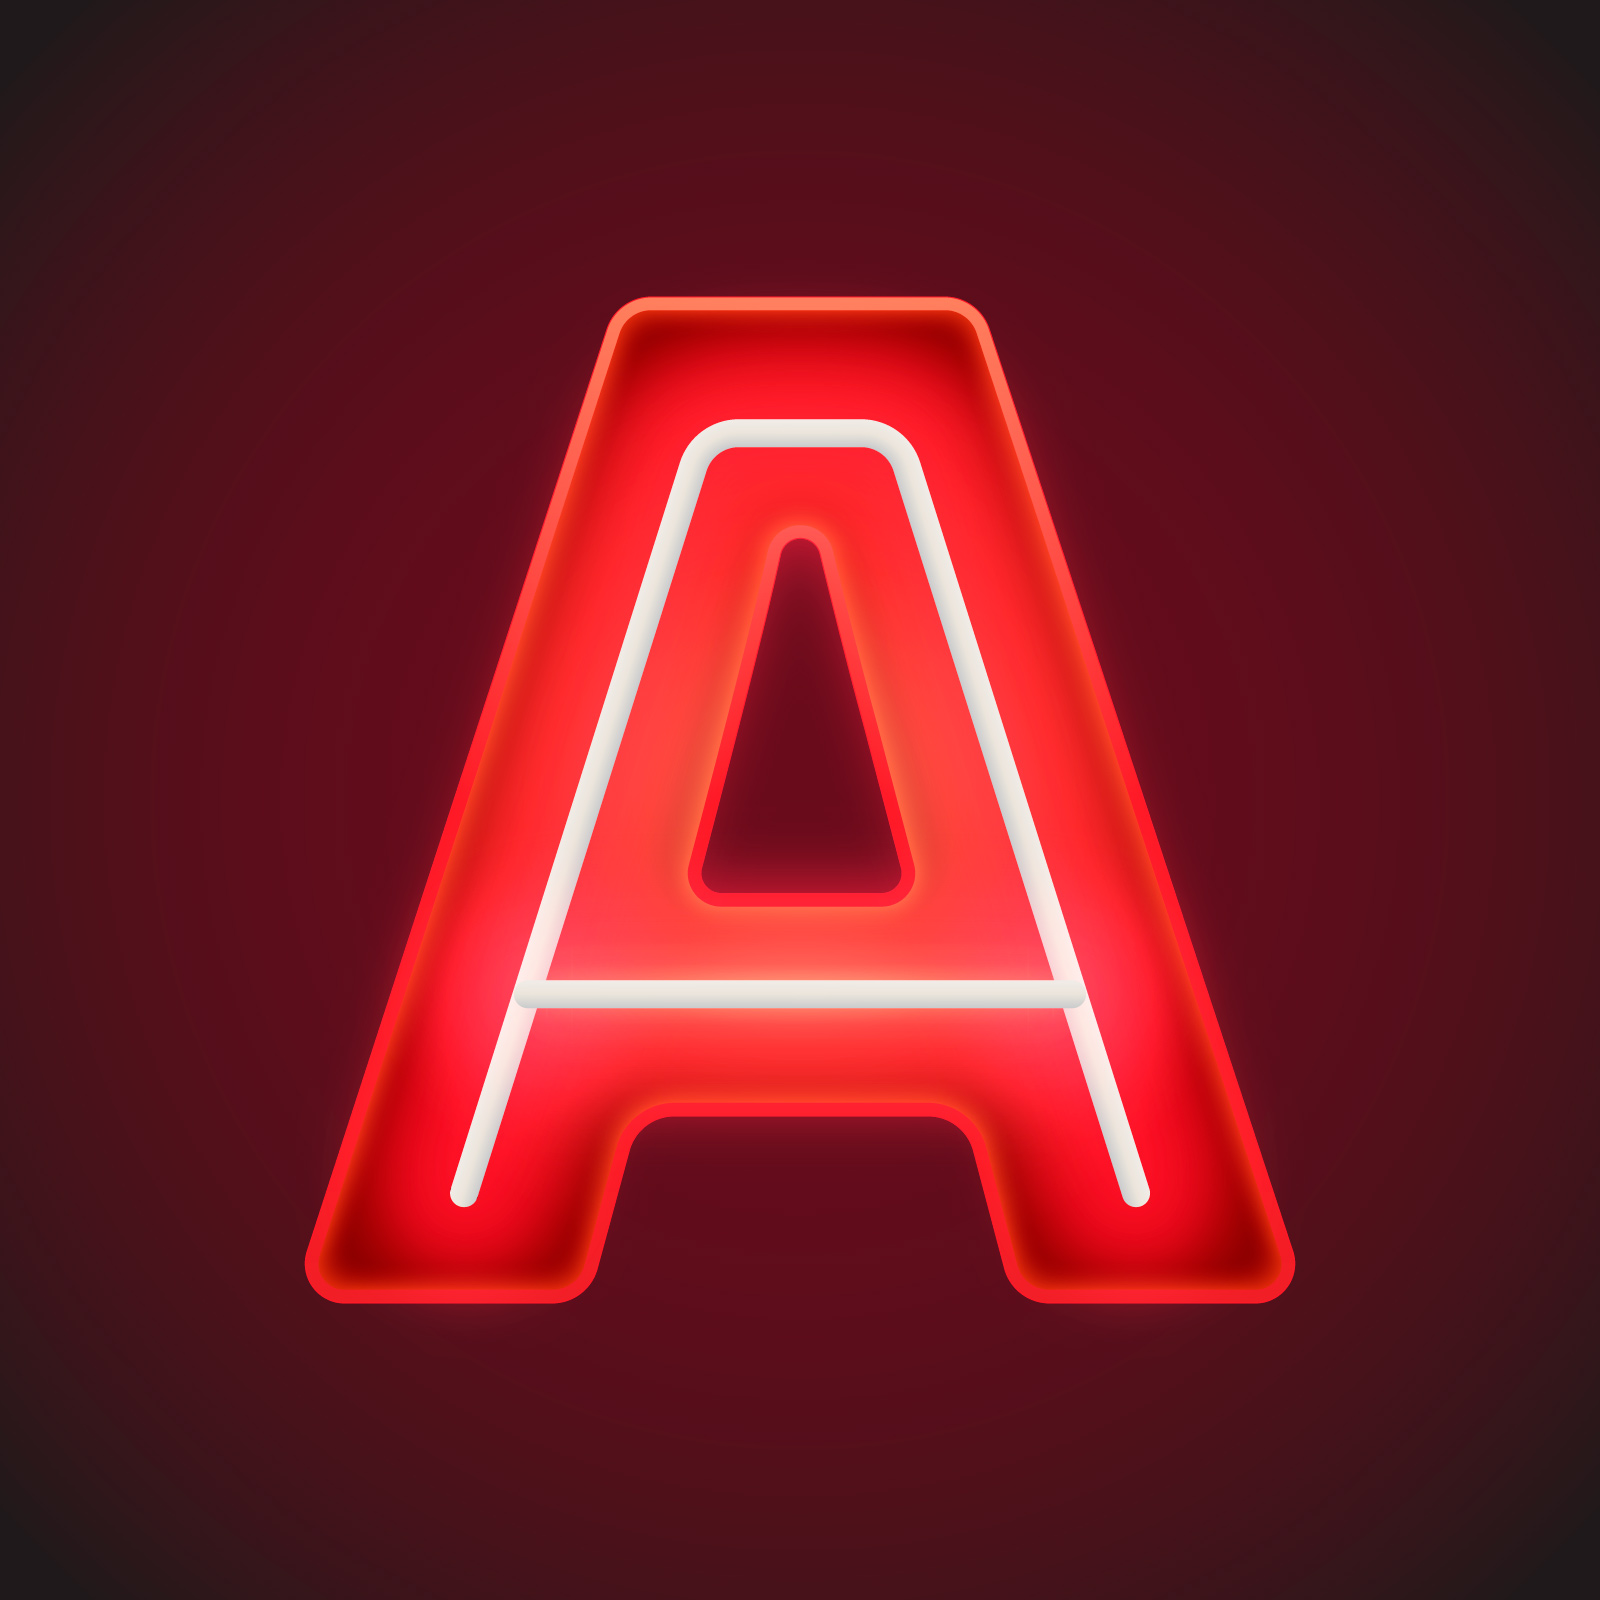 Letter A Custom Typography 184555 - Download Free Vectors ...